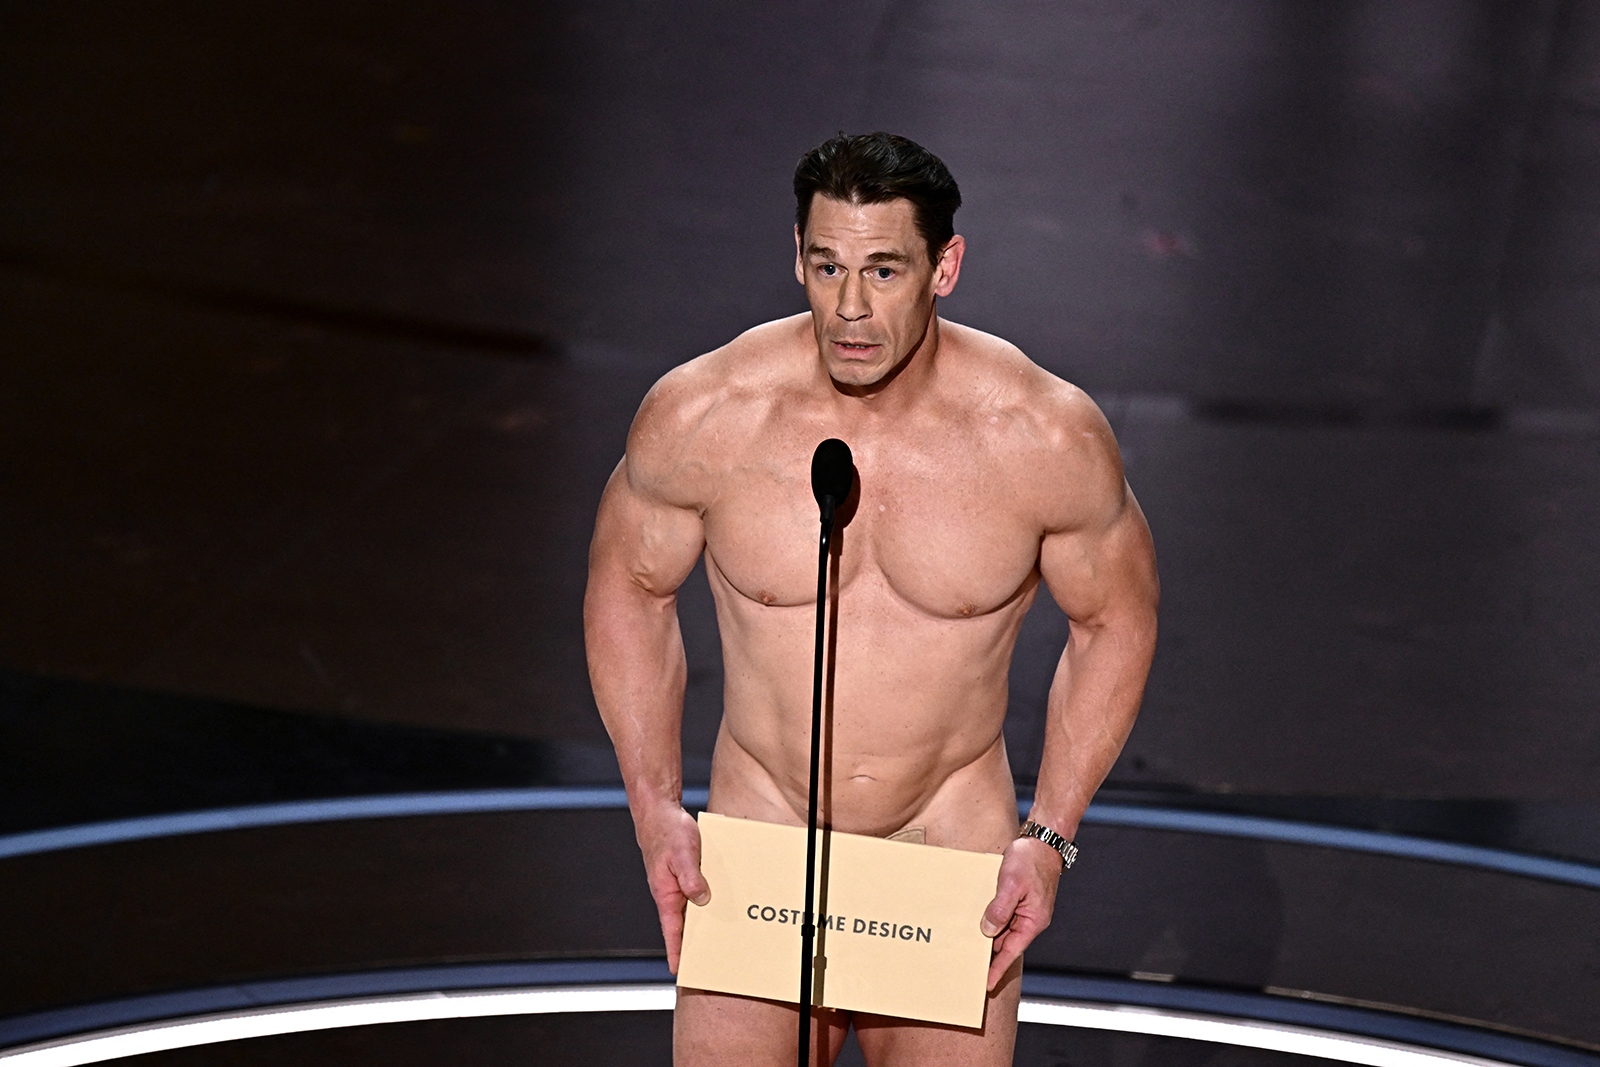 John Cena appears nervous while presenting the award for Best Costume Design at the 96th Academy Awards at the Dolby Theatre in Hollywood, California on March 10, 2024.